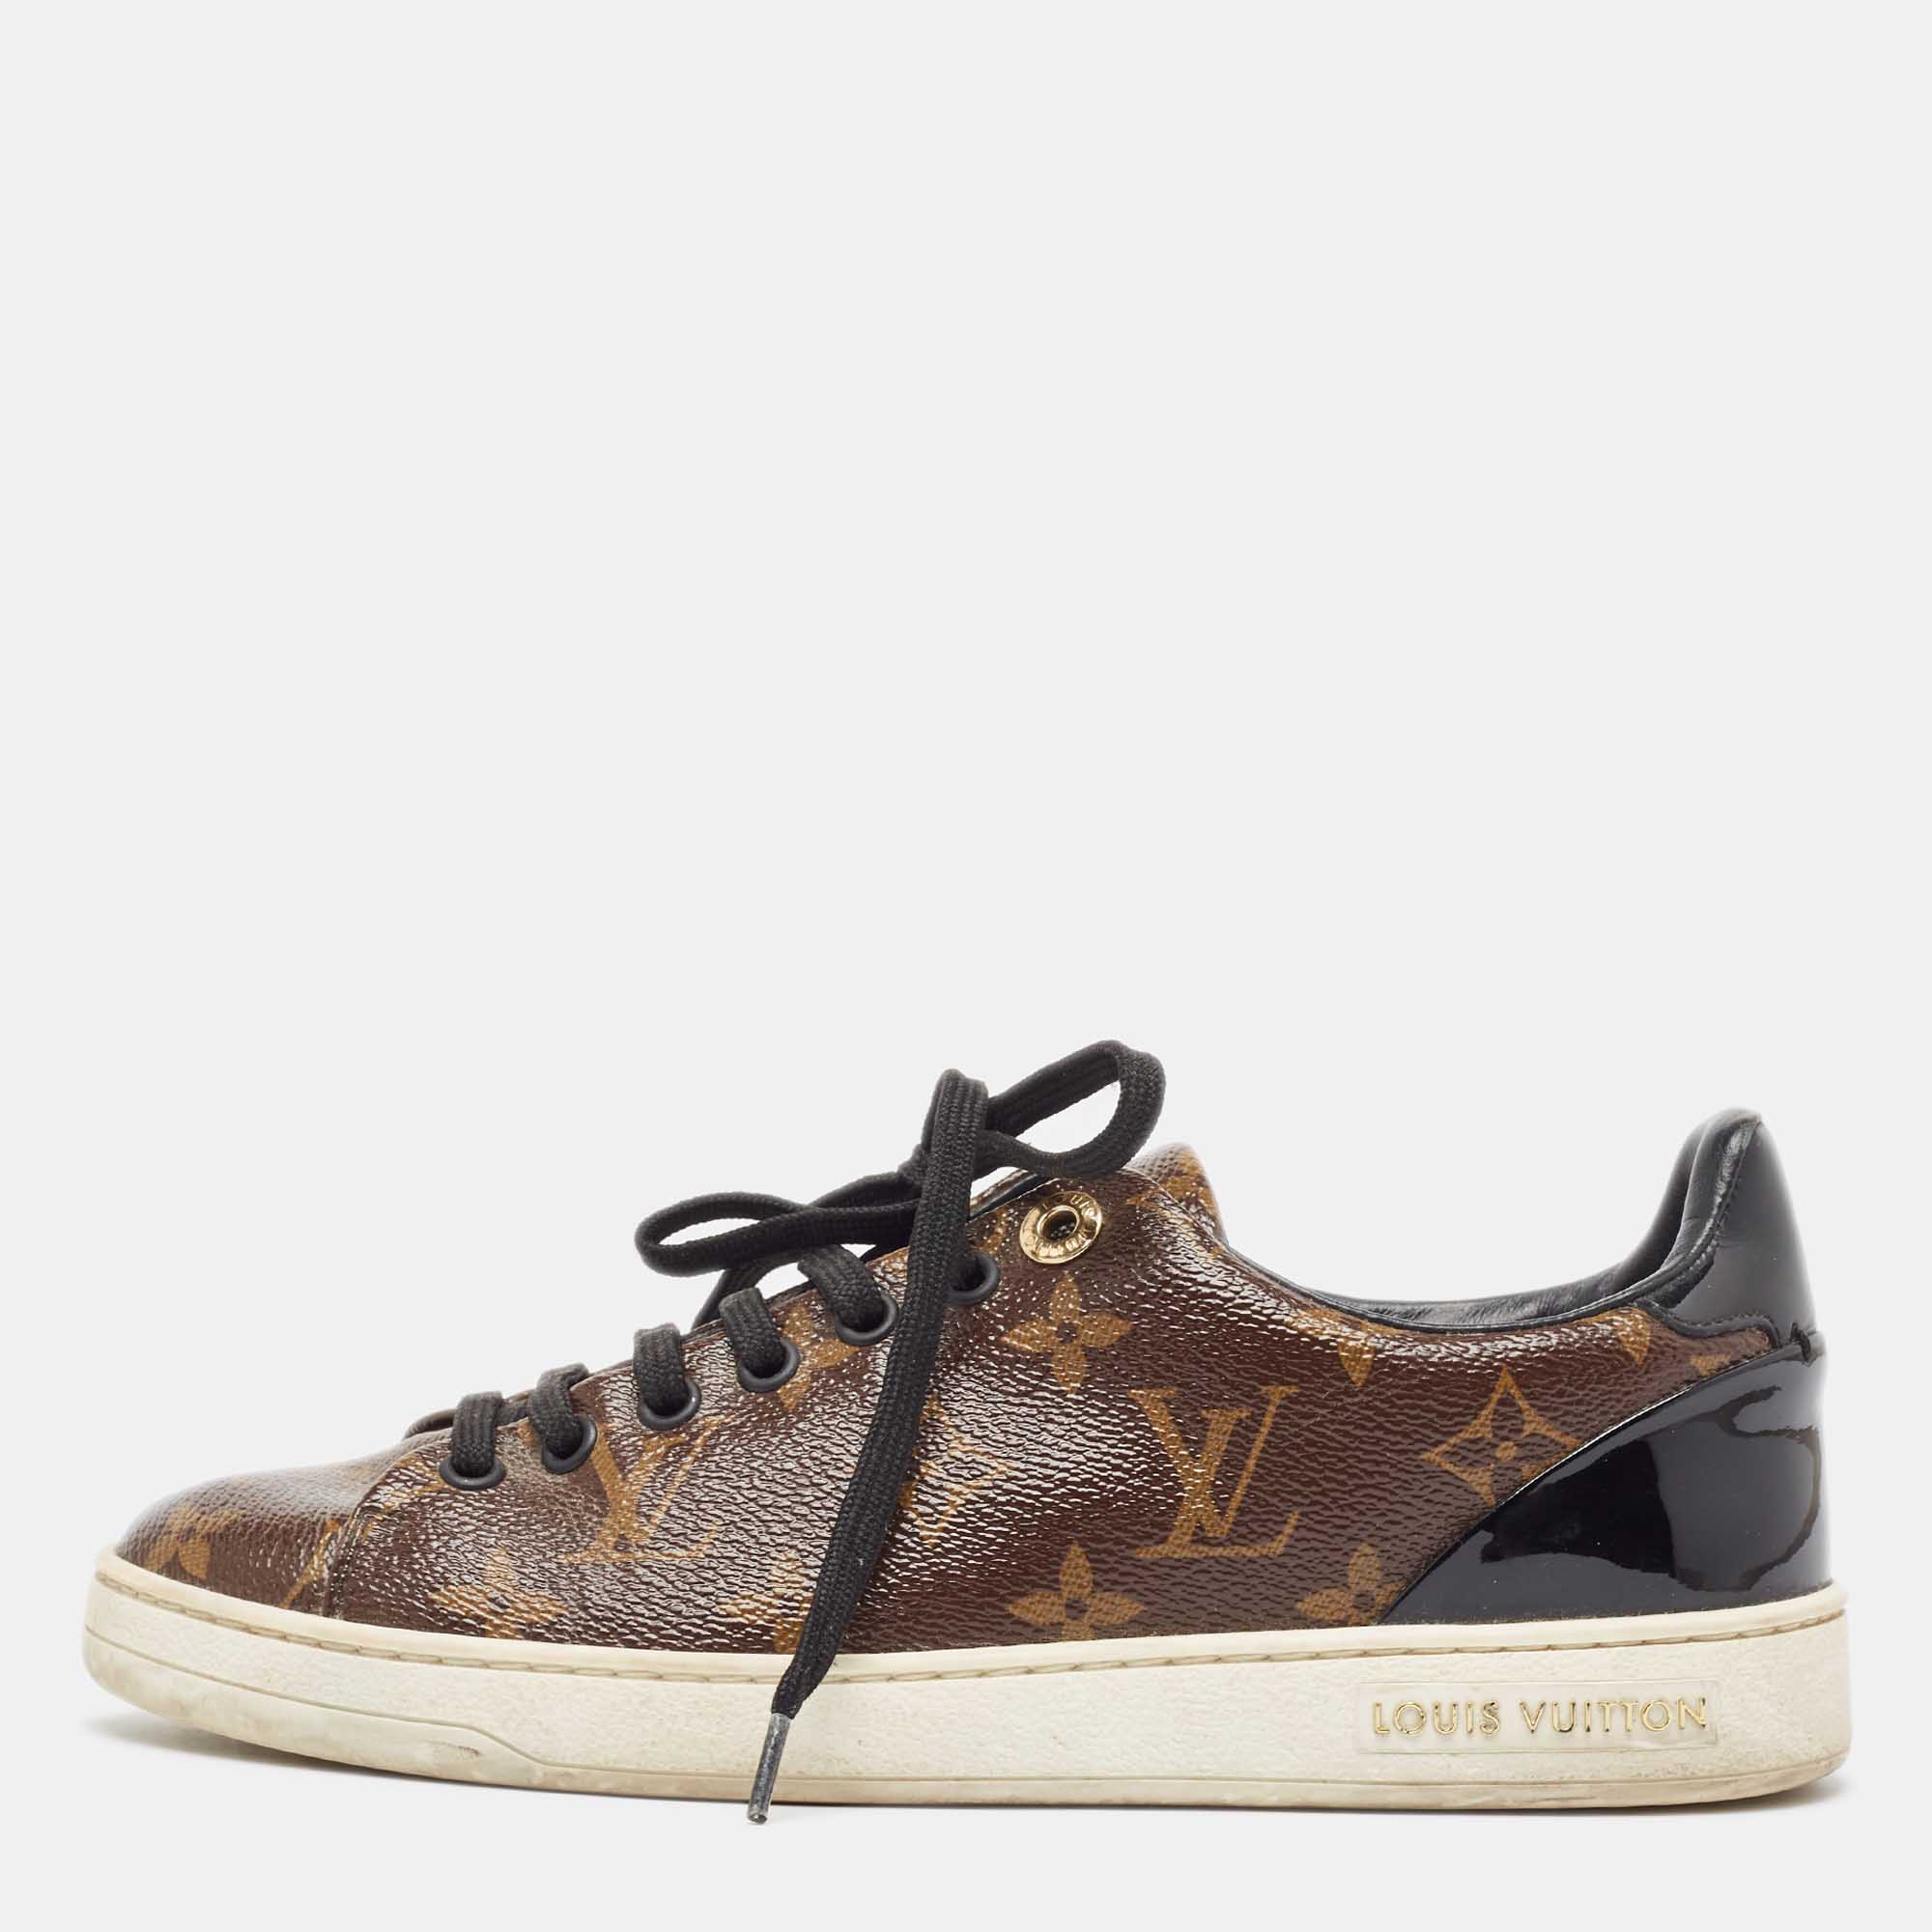 Louis vuitton brown/black monogram canvas and patent leather frontrow sneakers size 37